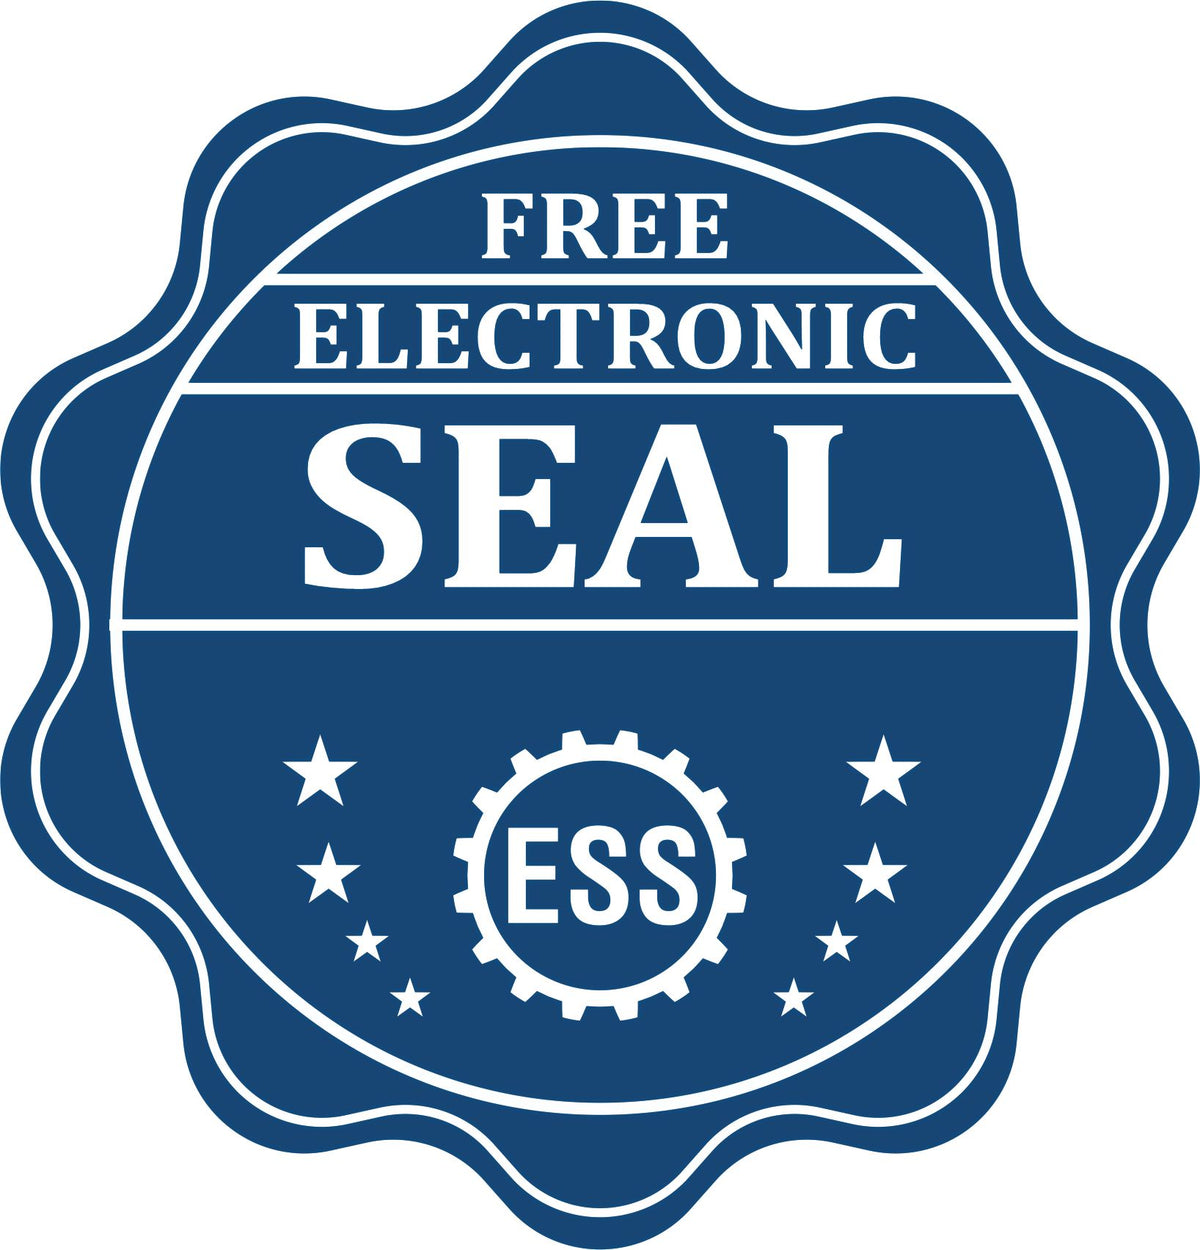 A badge showing a free electronic seal for the Handheld Idaho Professional Geologist Embosser with stars and the ESS gear on the emblem.